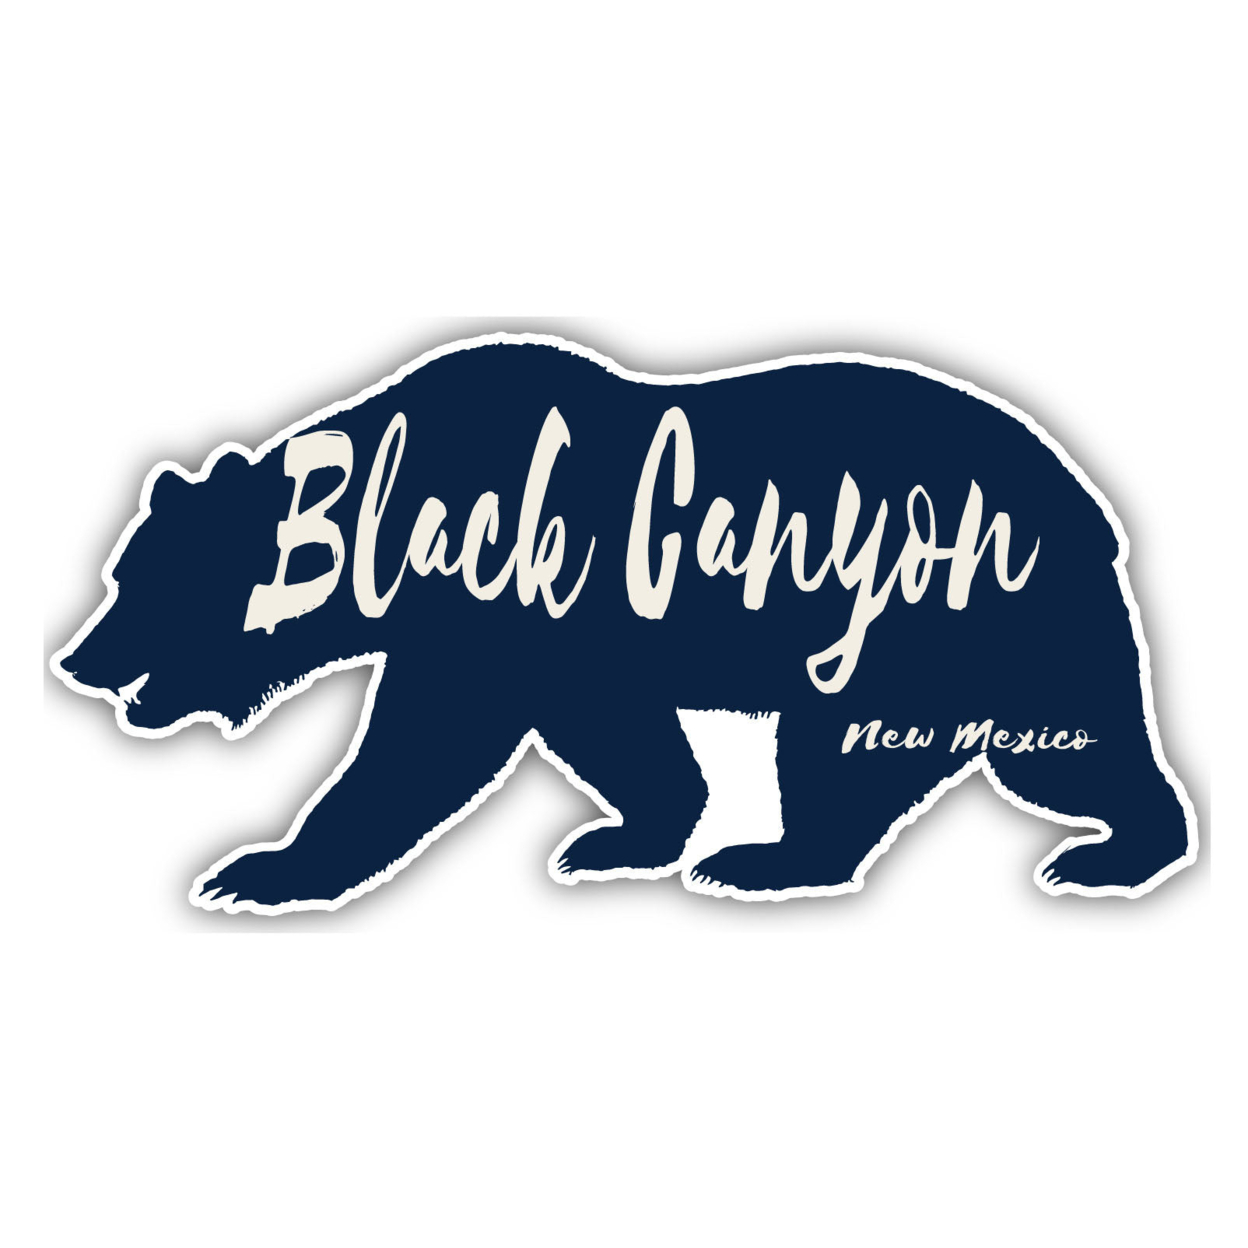 Black Canyon New Mexico Souvenir Decorative Stickers (Choose Theme And Size) - 4-Pack, 10-Inch, Bear